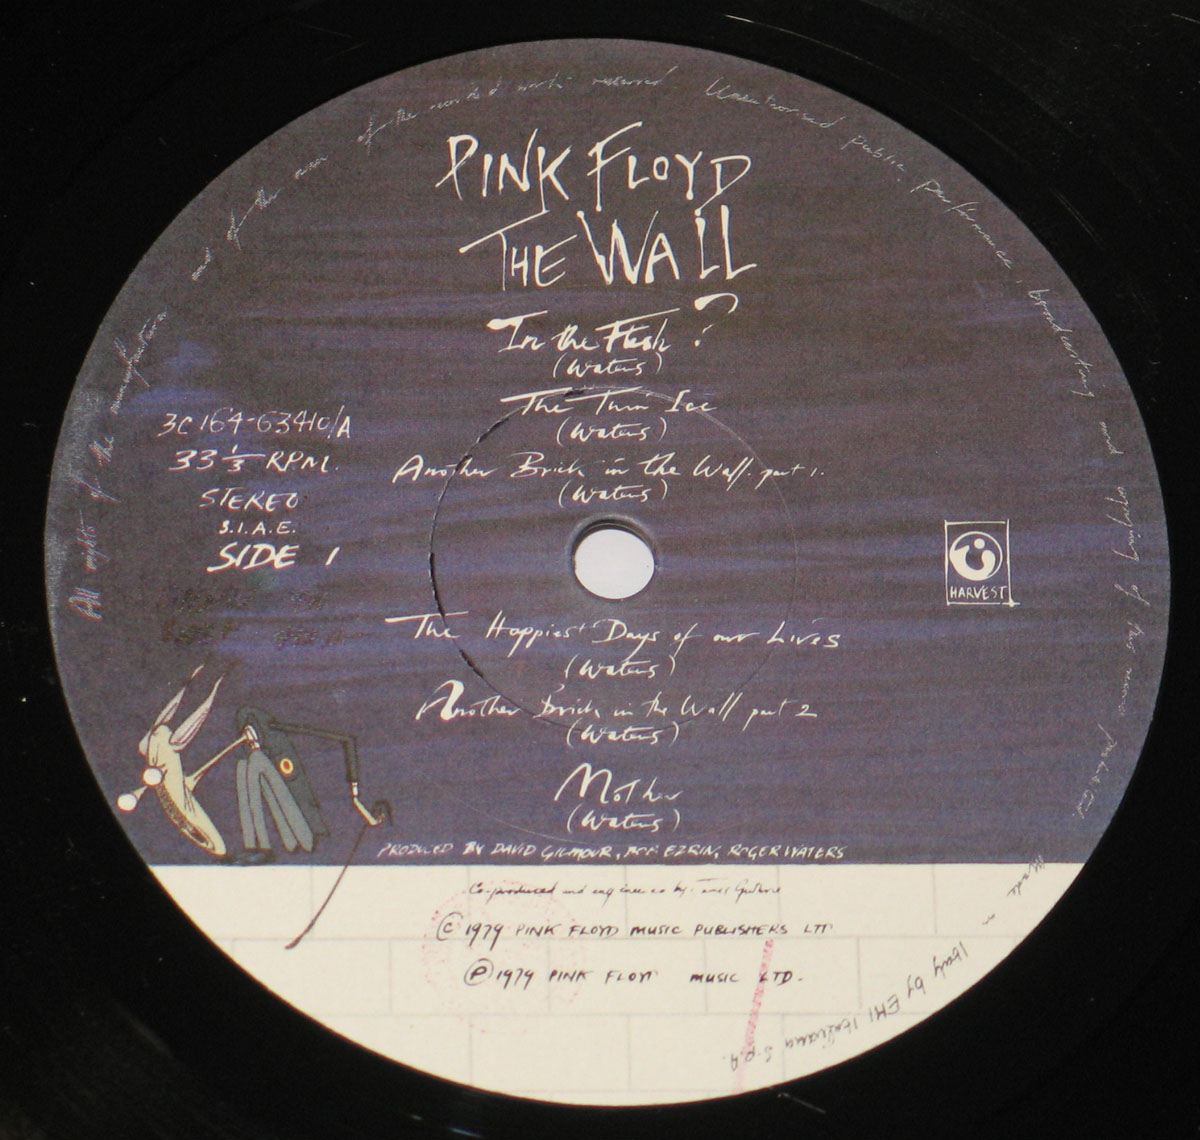 PINK FLOYD The Wall Italy Album Cover Gallery & 12 Vinyl LP Discography  Information #vinylrecords